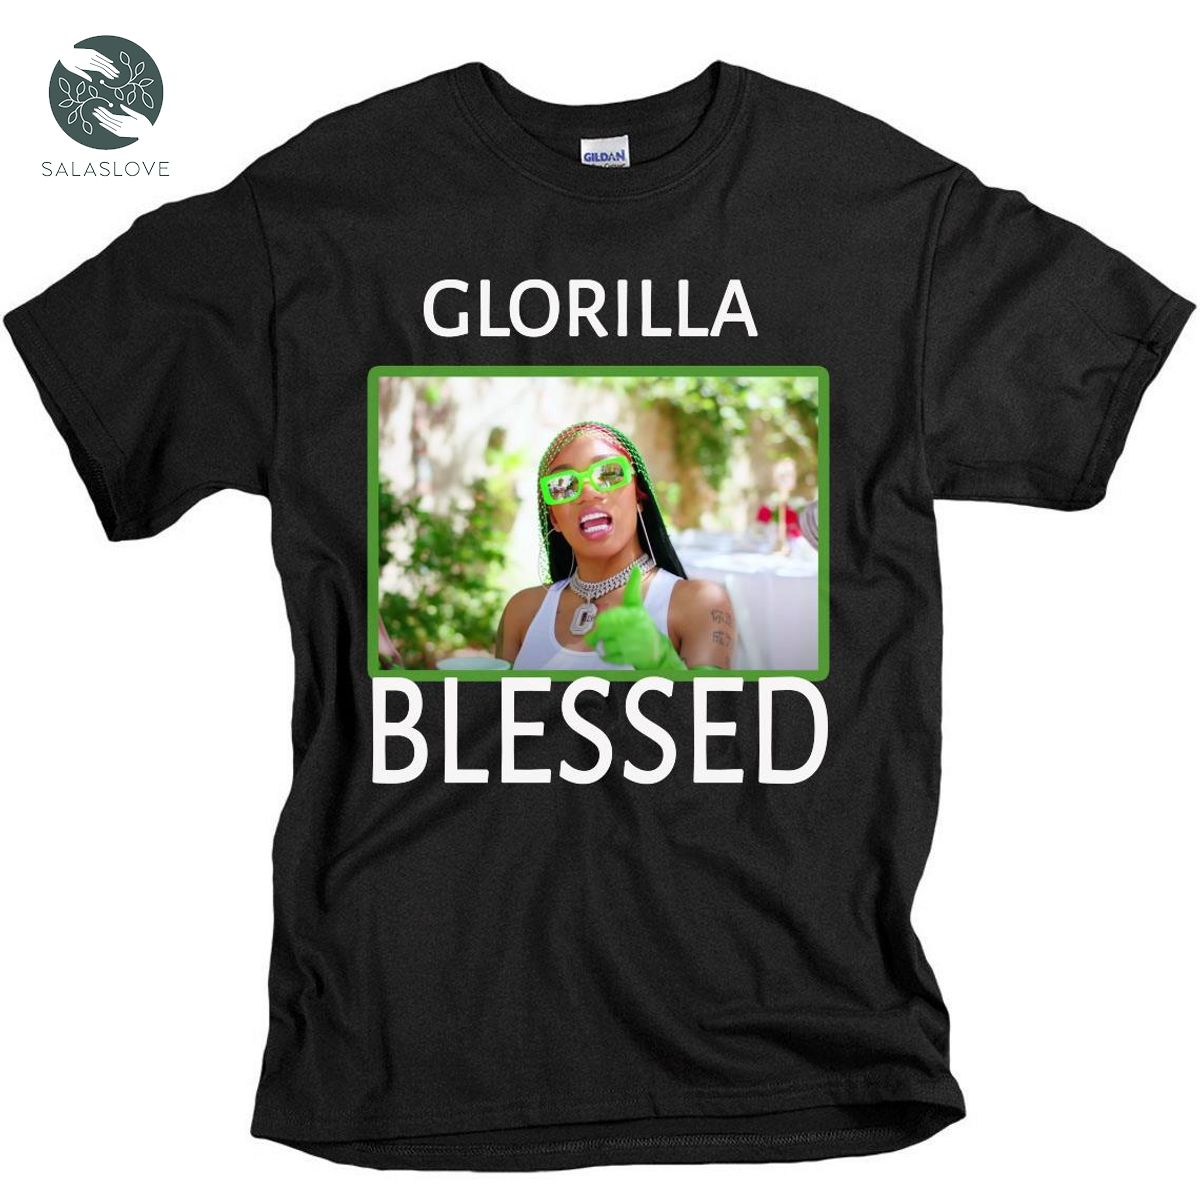 Blessed - Glorilla New Single Music Shirt For Fan